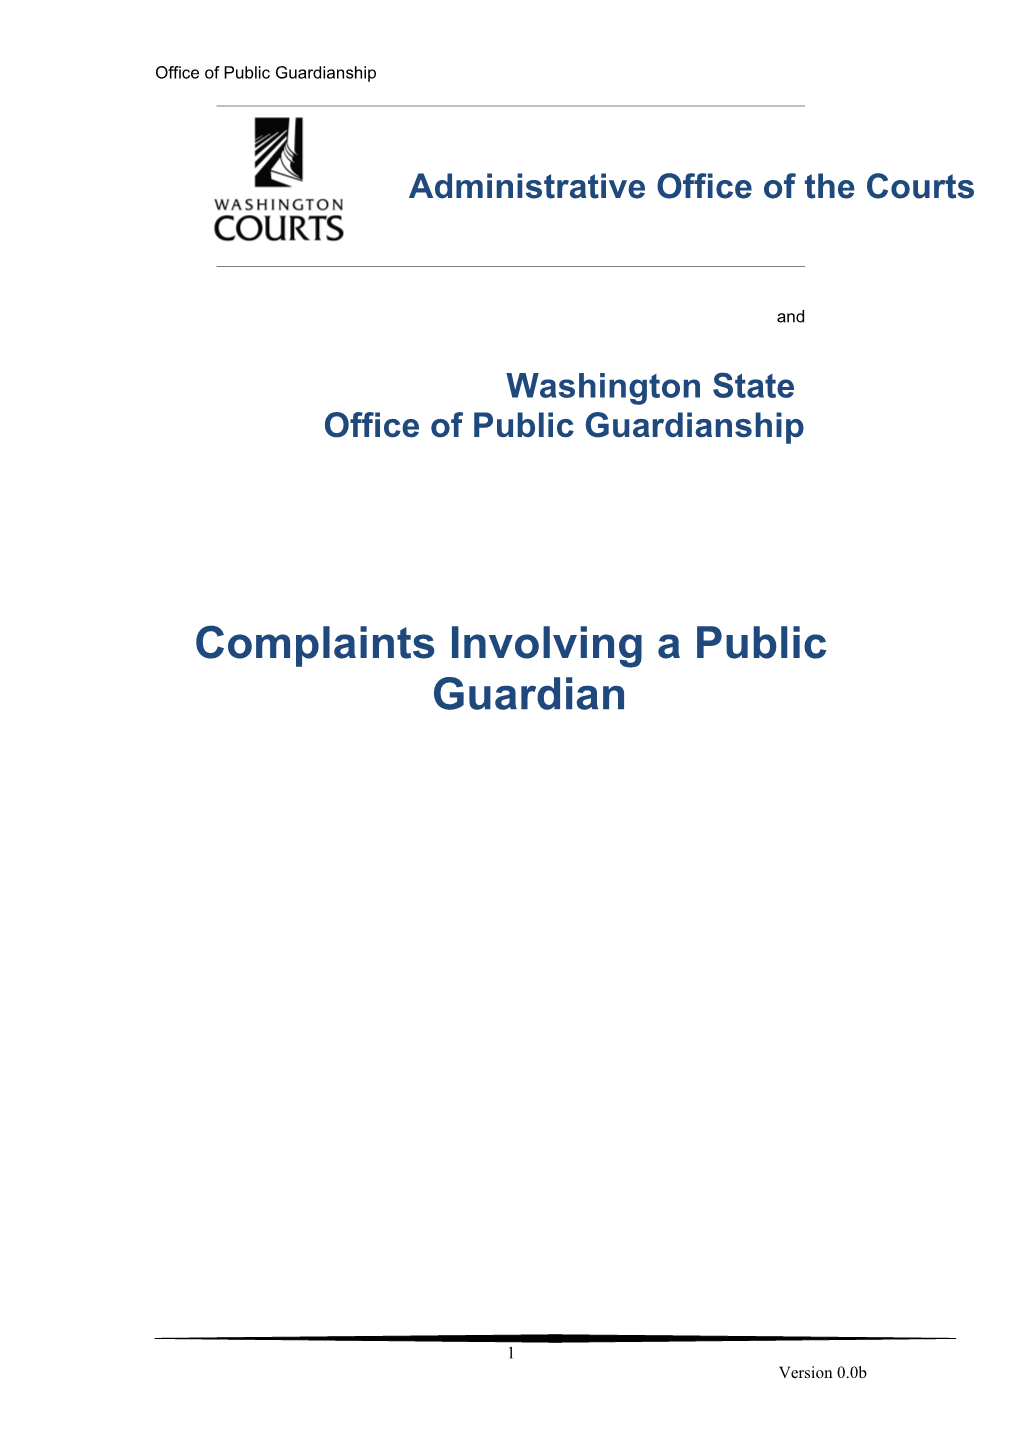 Office of the Public Guardian Customer Charter